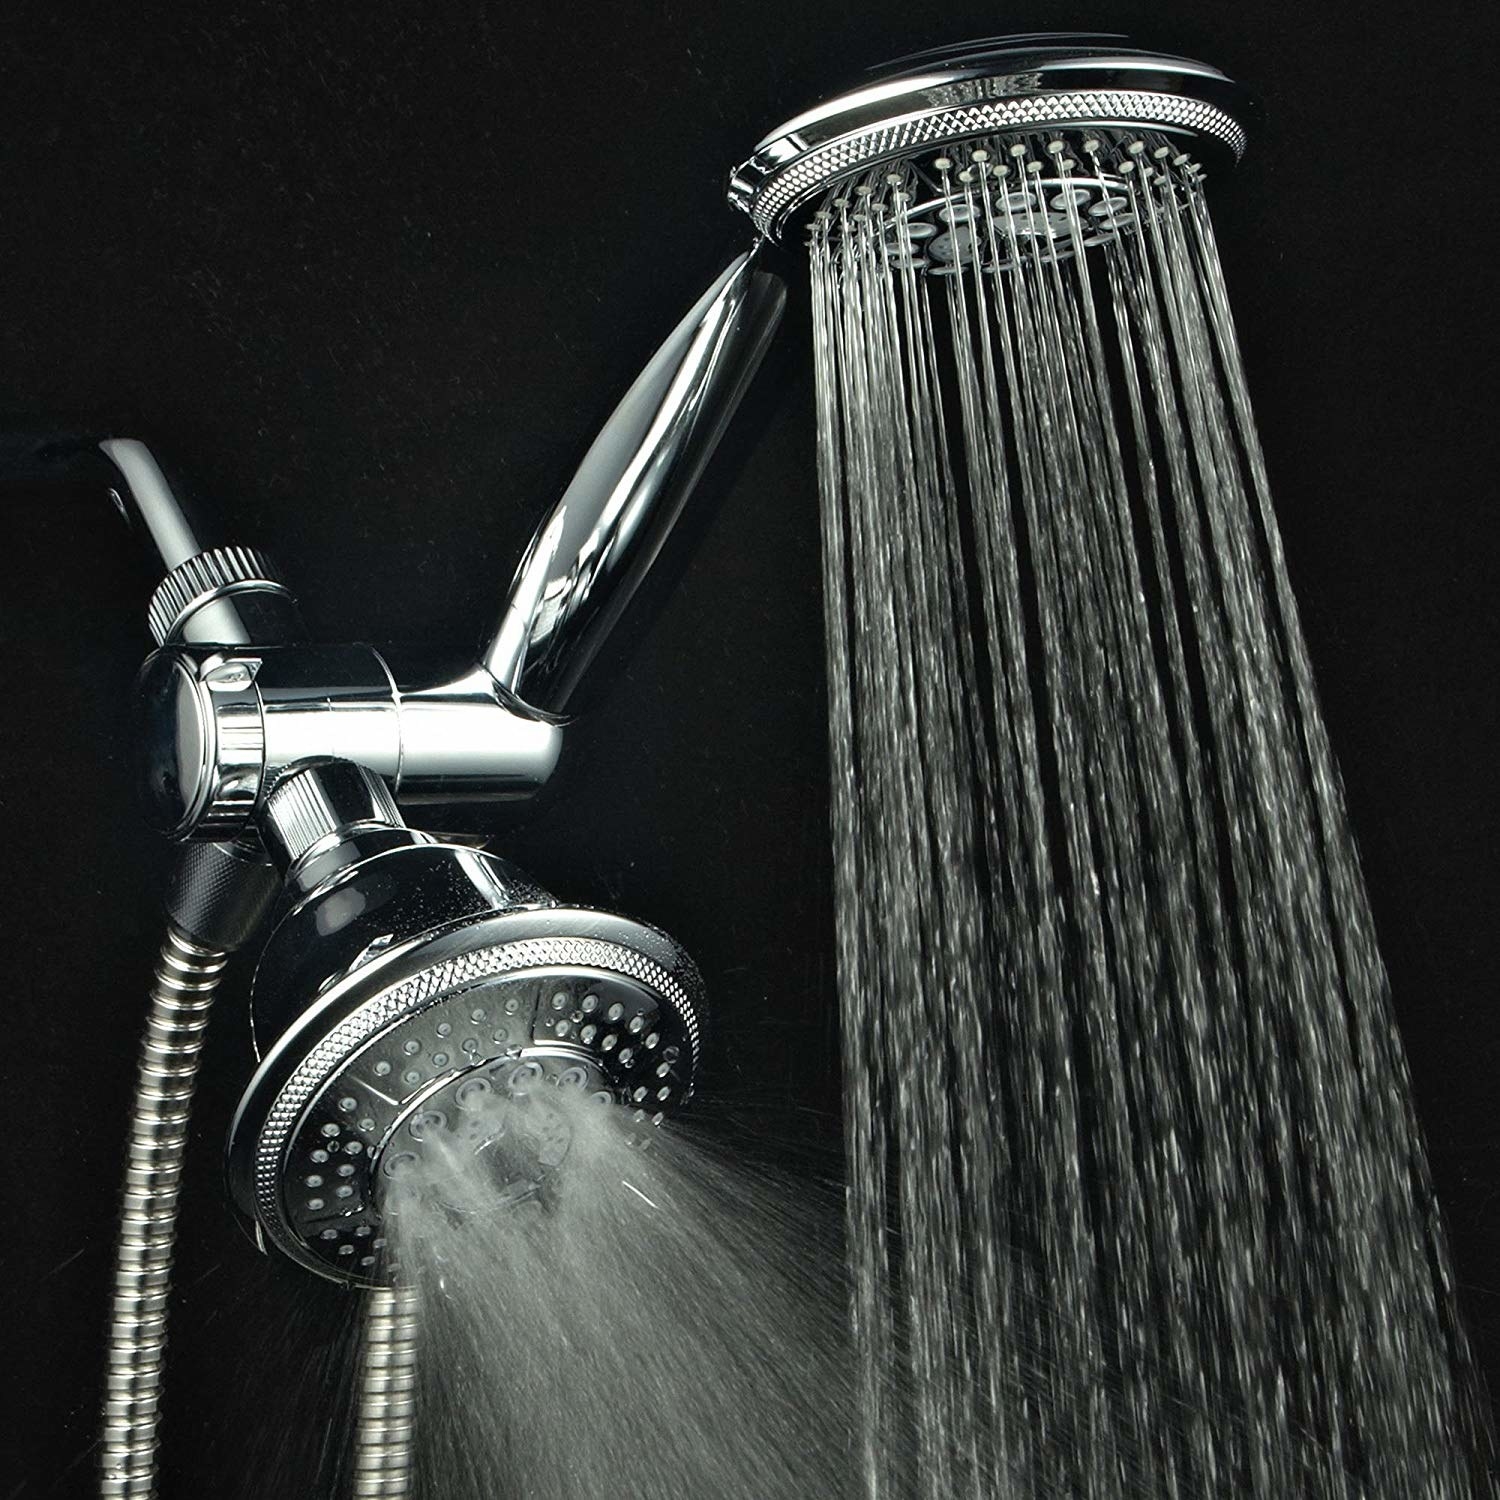 The shower head and the handheld sprayer with a steady stream of water coming out